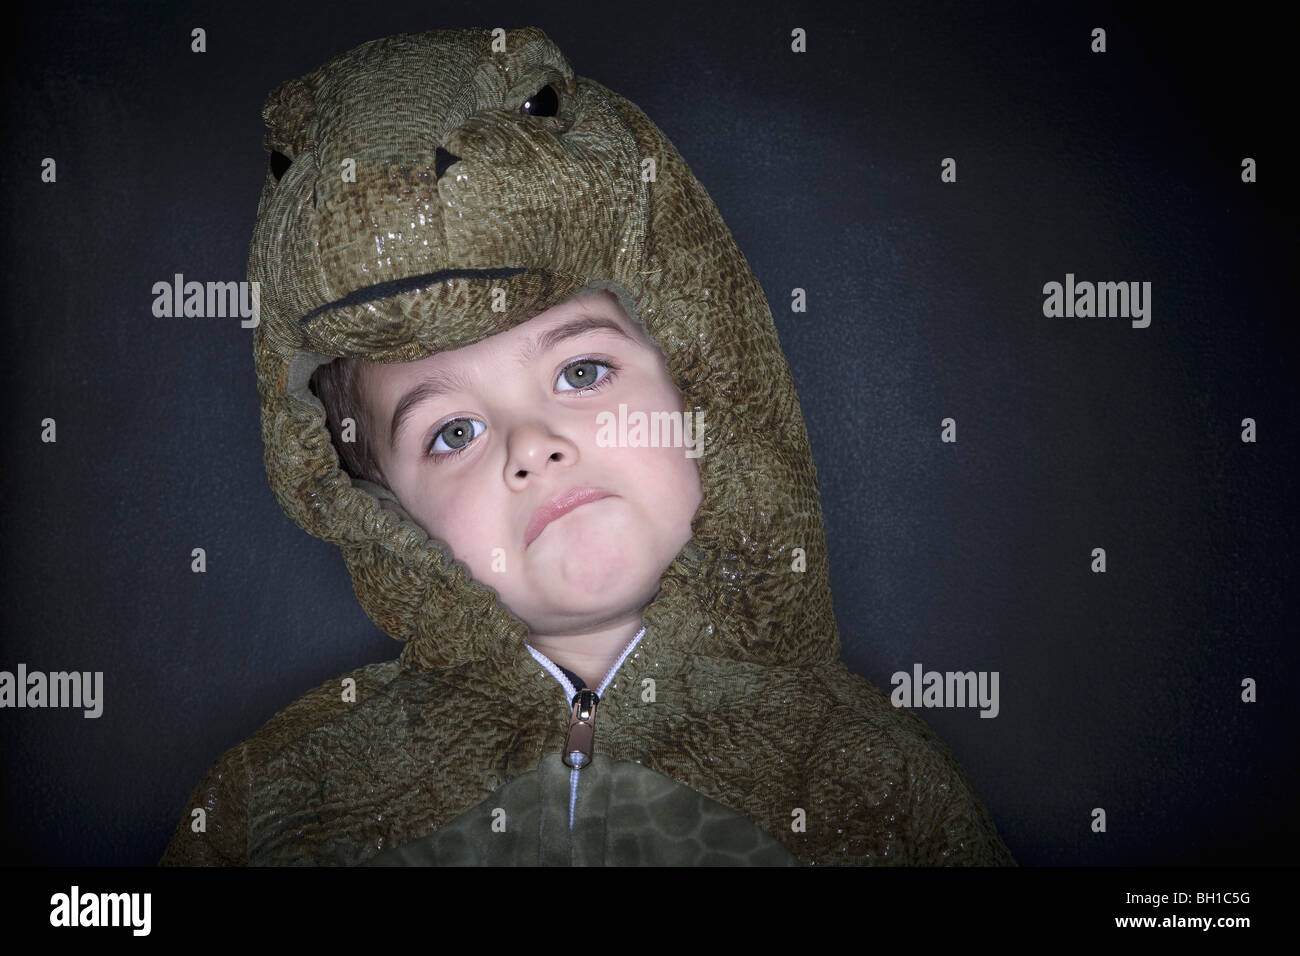 Toddler in a reptile costume Stock Photo